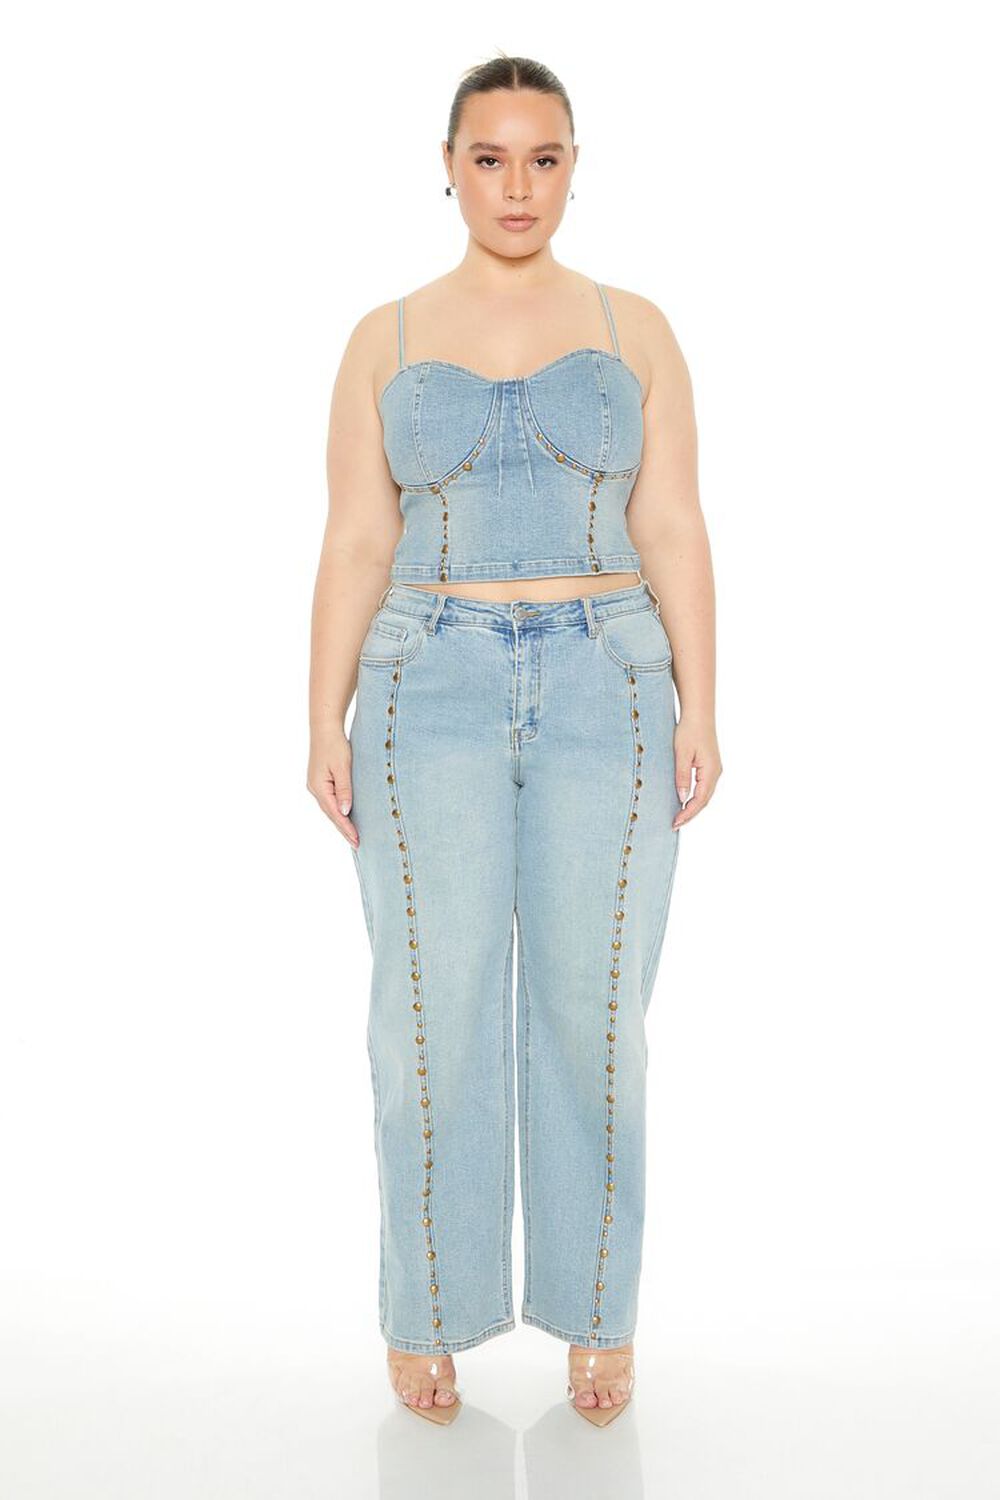 Stylish Plus Size Bottoms at Forever 21